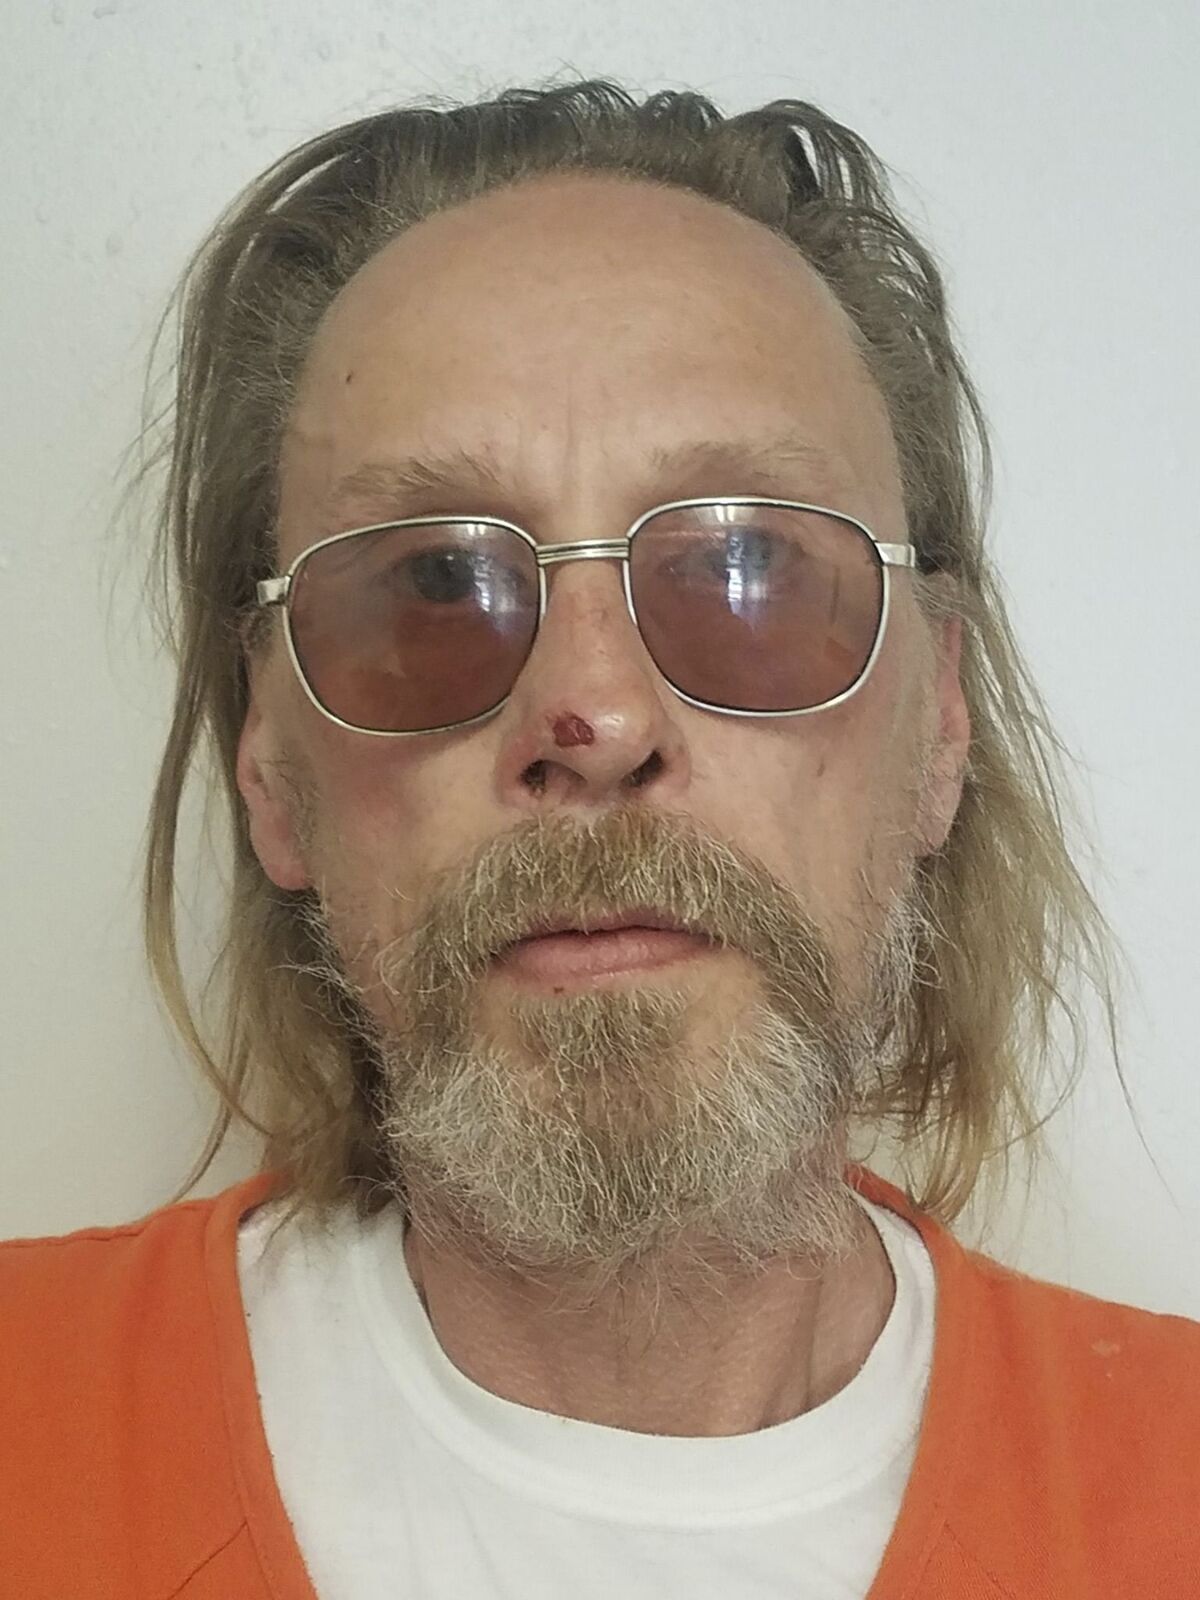 FILE - This undated file photo released by the Costilla County, Colo., Sheriff's Office shows Jesper Joergensen. A prosecutor says criminal charges will probably be dropped against the mentally ill Danish man accused of starting the large 2018 Colorado wildfire. District Attorney Alonzo Payne didn't elaborate about his reasoning during a court hearing for Joergensen on Monday Feb. 14, 2022. (Costilla County Sheriff's Office via AP, File)